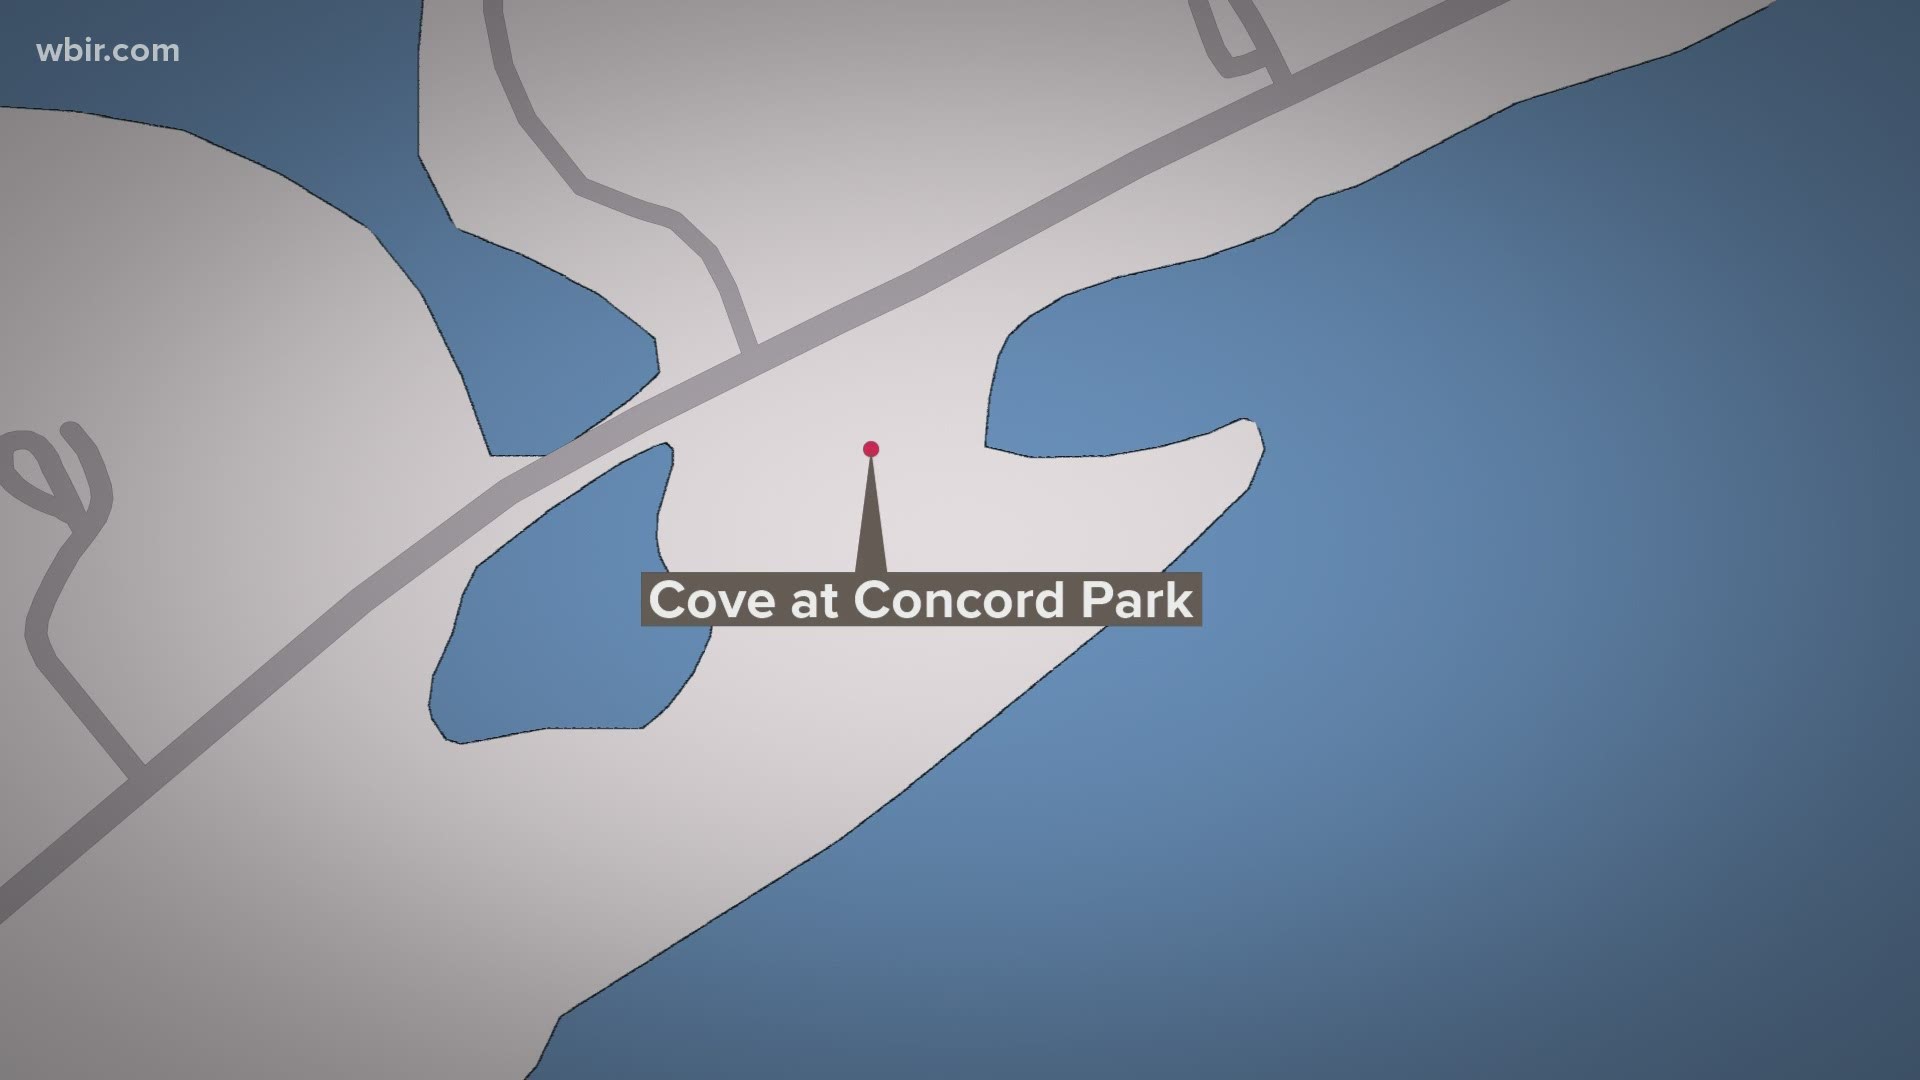 renovations are set to begin this week at the Cove at Concord Park.